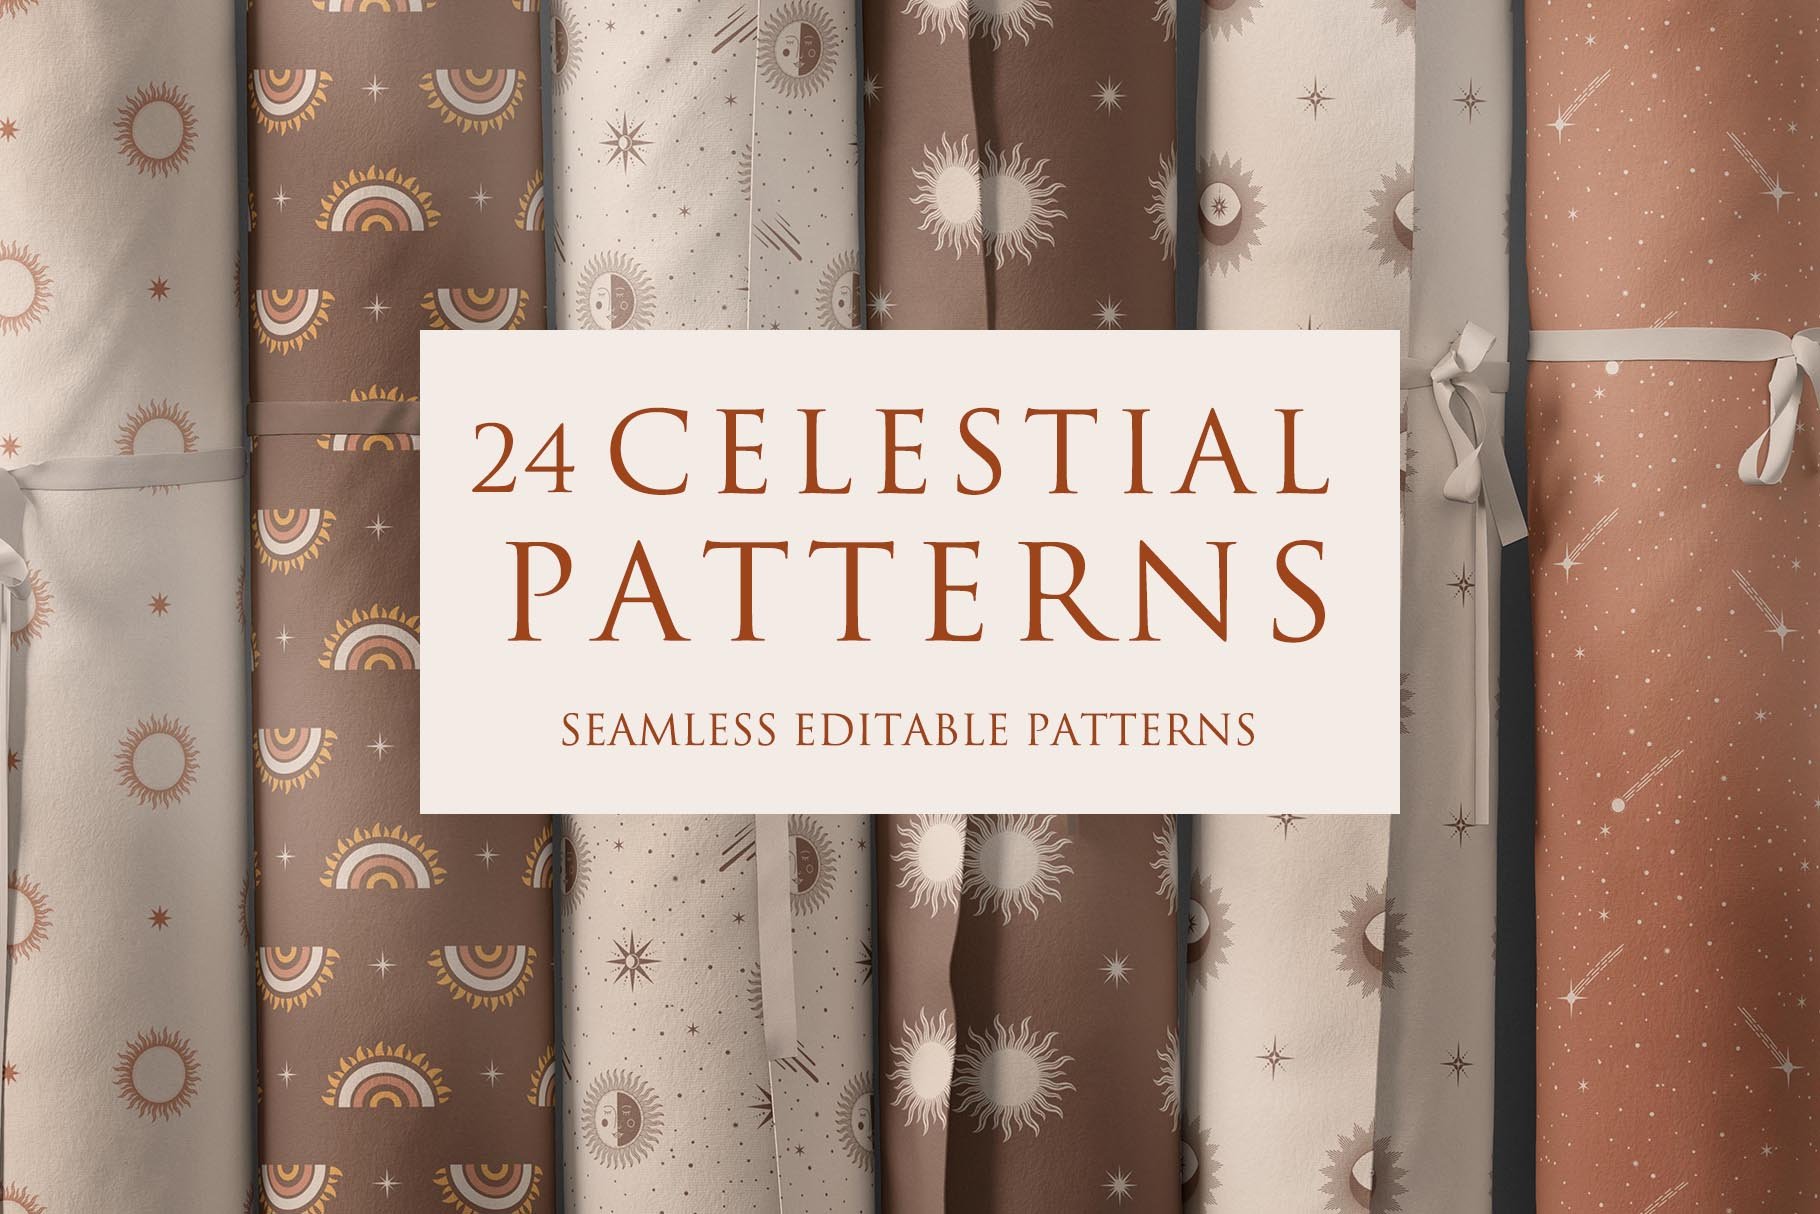 Celestial Magic Seamless Patterns cover image.